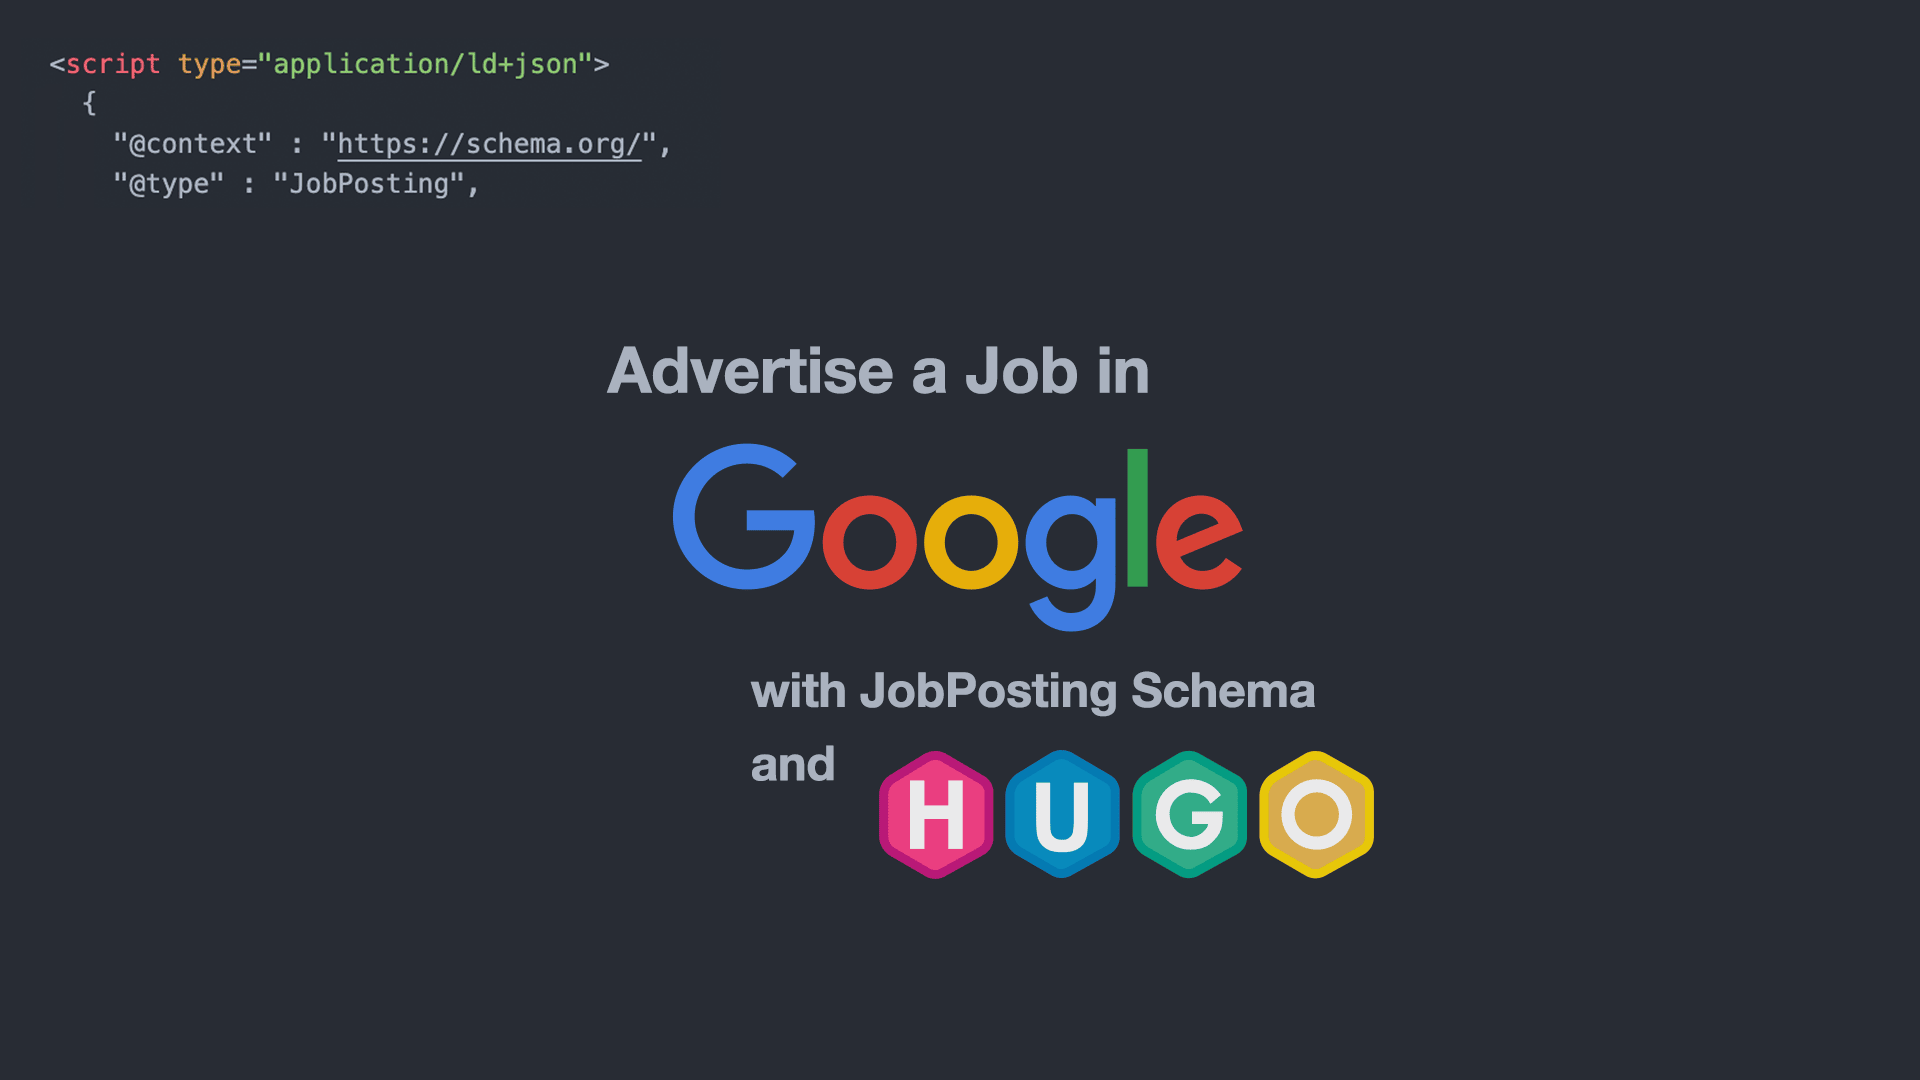 How to add Job Vacancy to Google from a static Hugo website